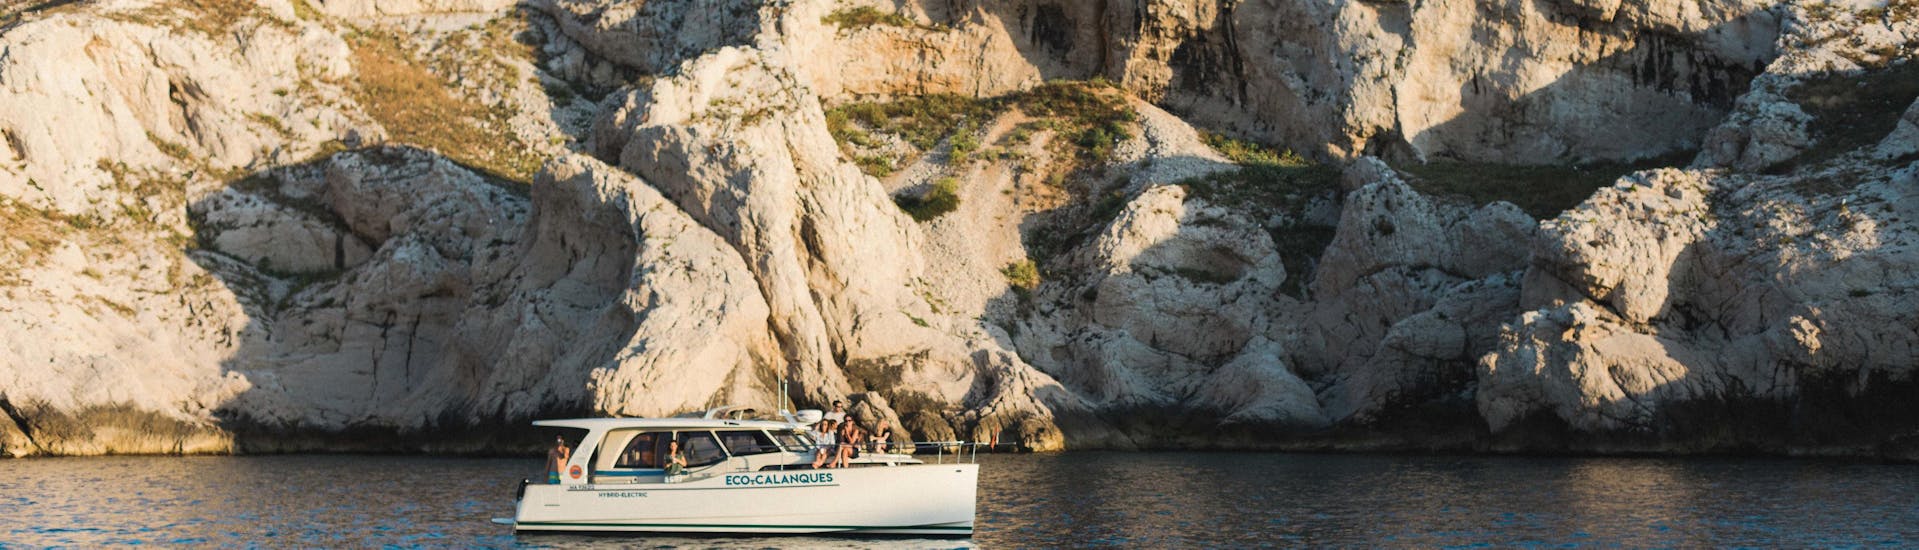 The boat of Eco Calanques Marseille during one of their tours. 